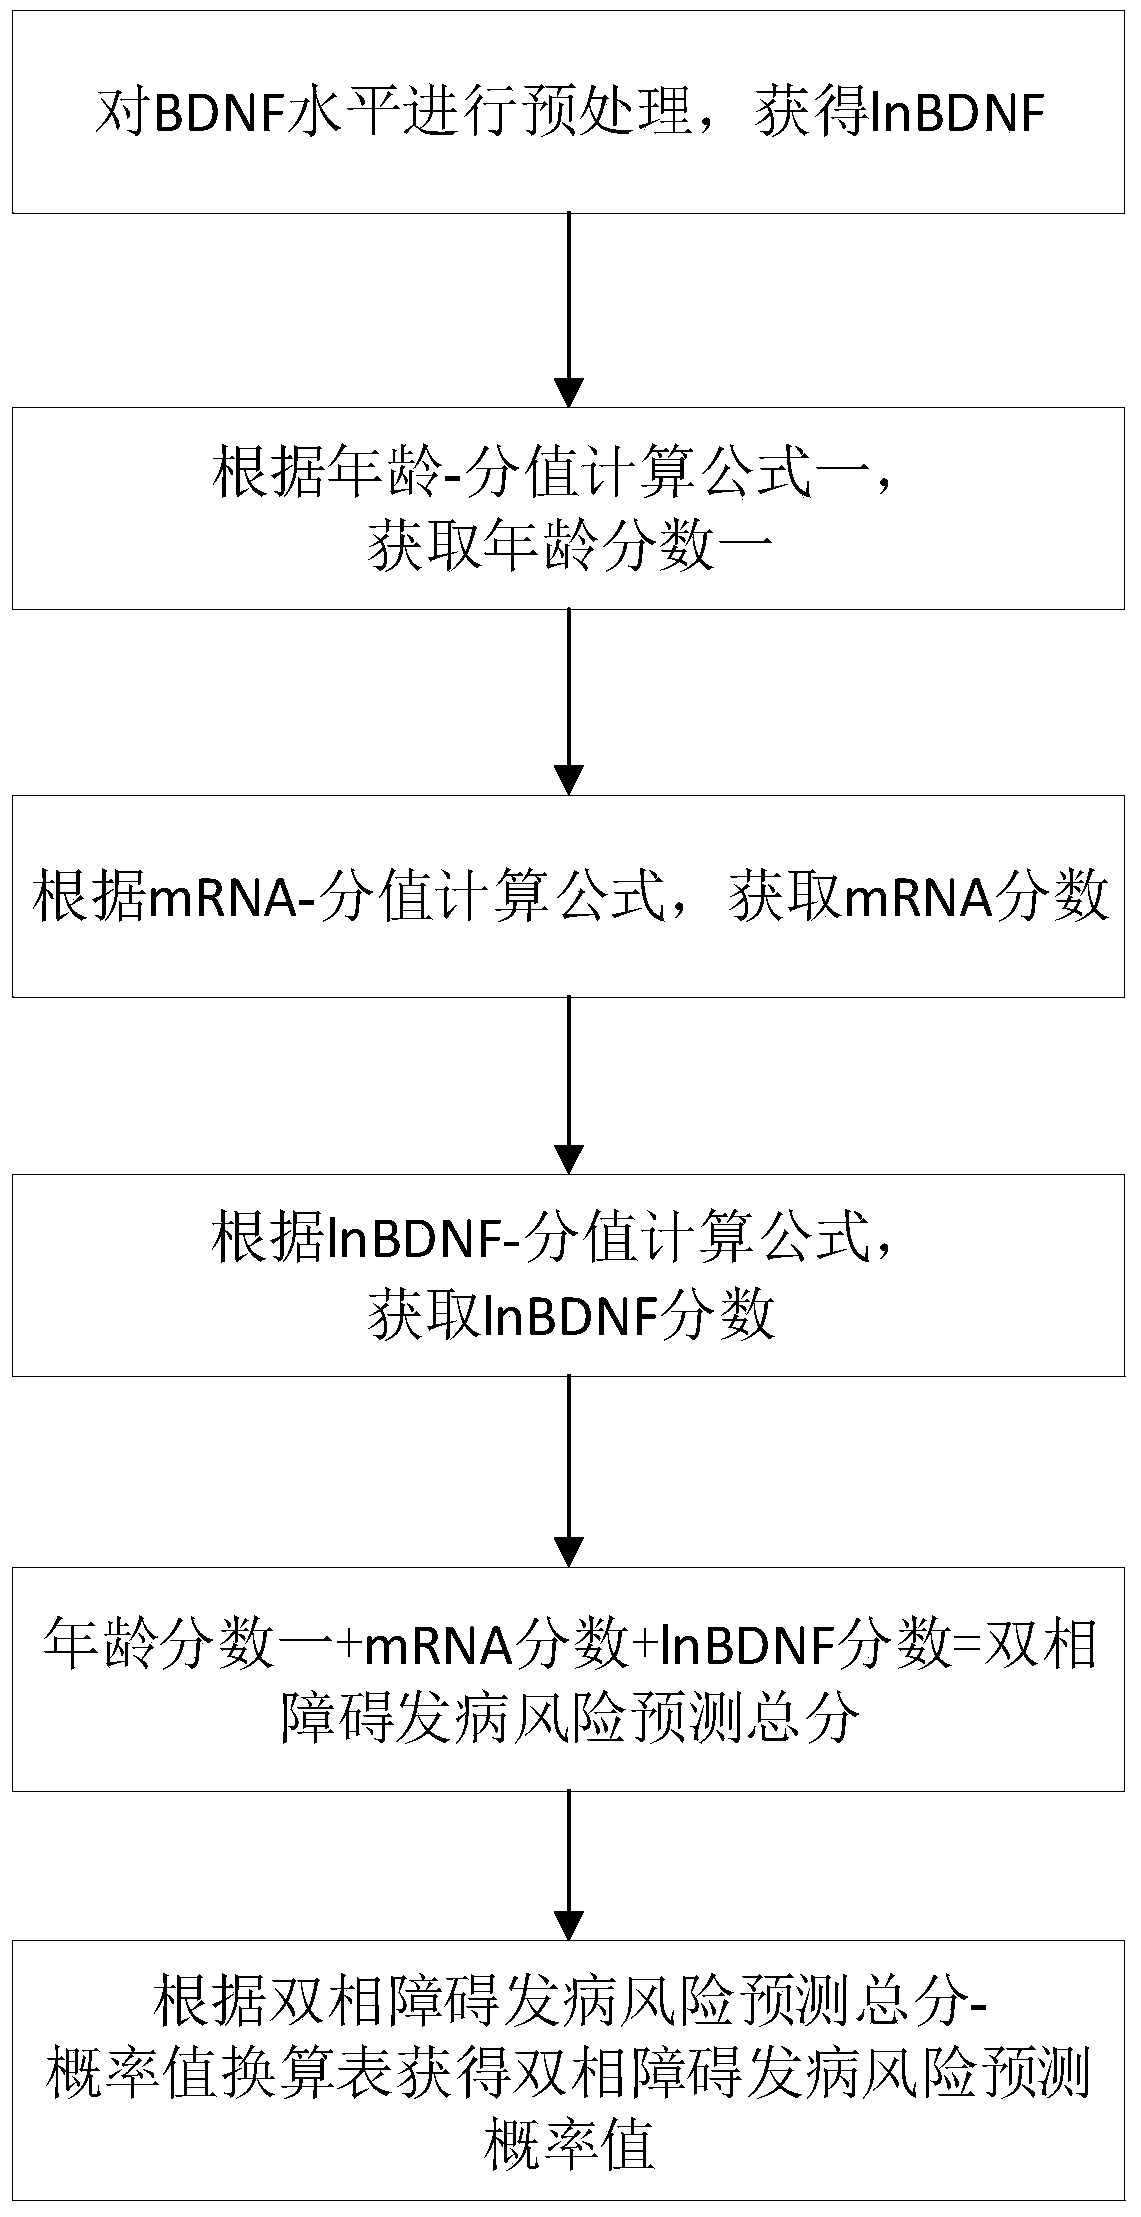 Method for early identification of bipolar disorder based on BDNF